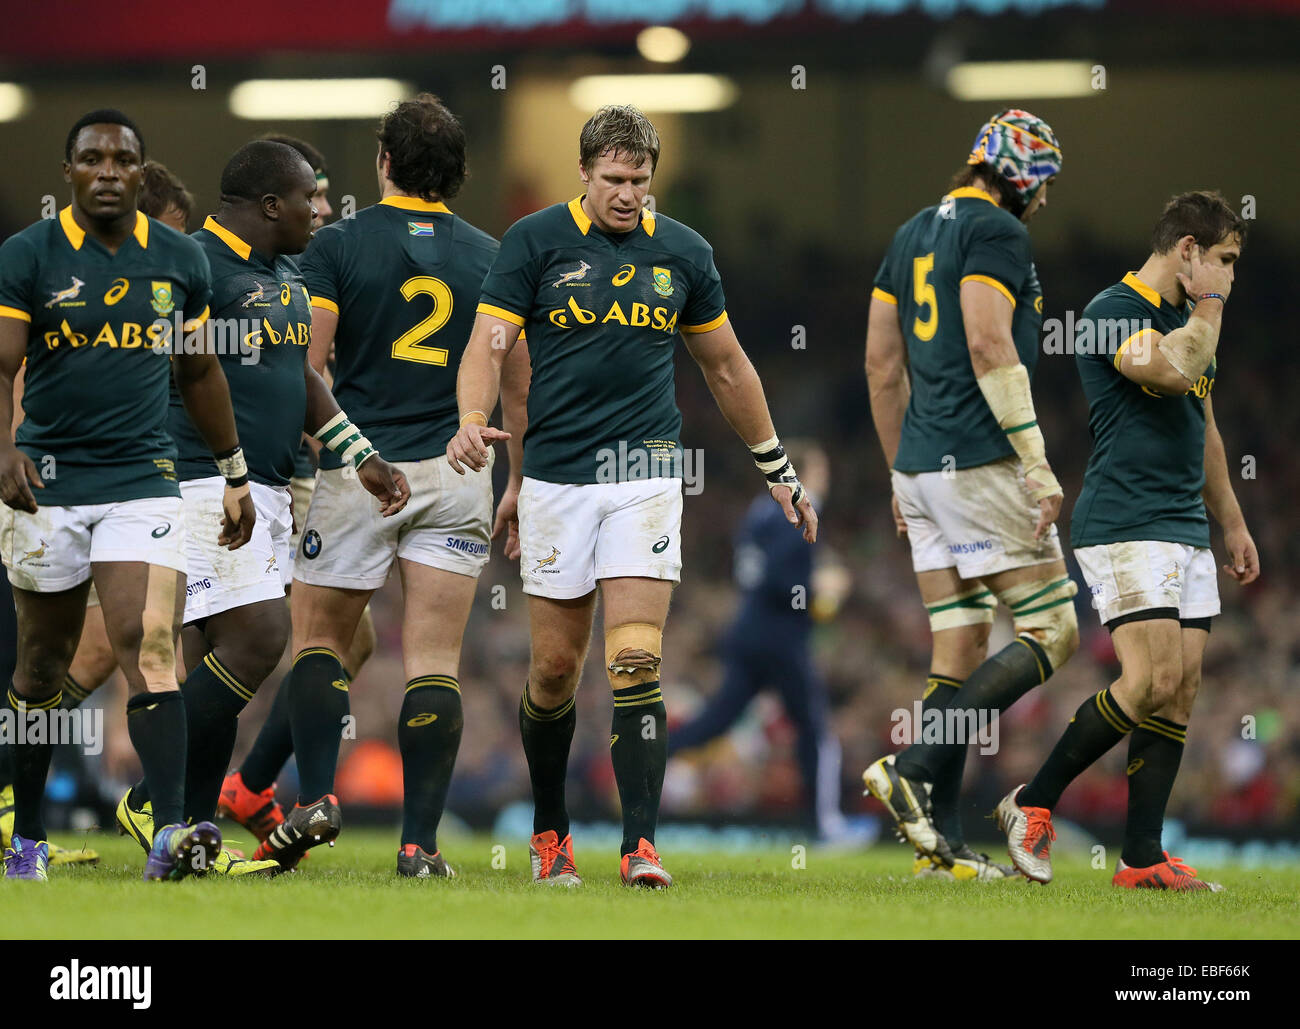 Cardiff, UK. 29th Nov, 2014. Jean De Villiers of South Africa walks back with his team - Autumn Internationals - Wales vs South Africa - Millennium Stadium - Cardiff - Wales - 29th November 2014 - Picture Simon Bellis/Sportimage. Credit:  csm/Alamy Live News Stock Photo